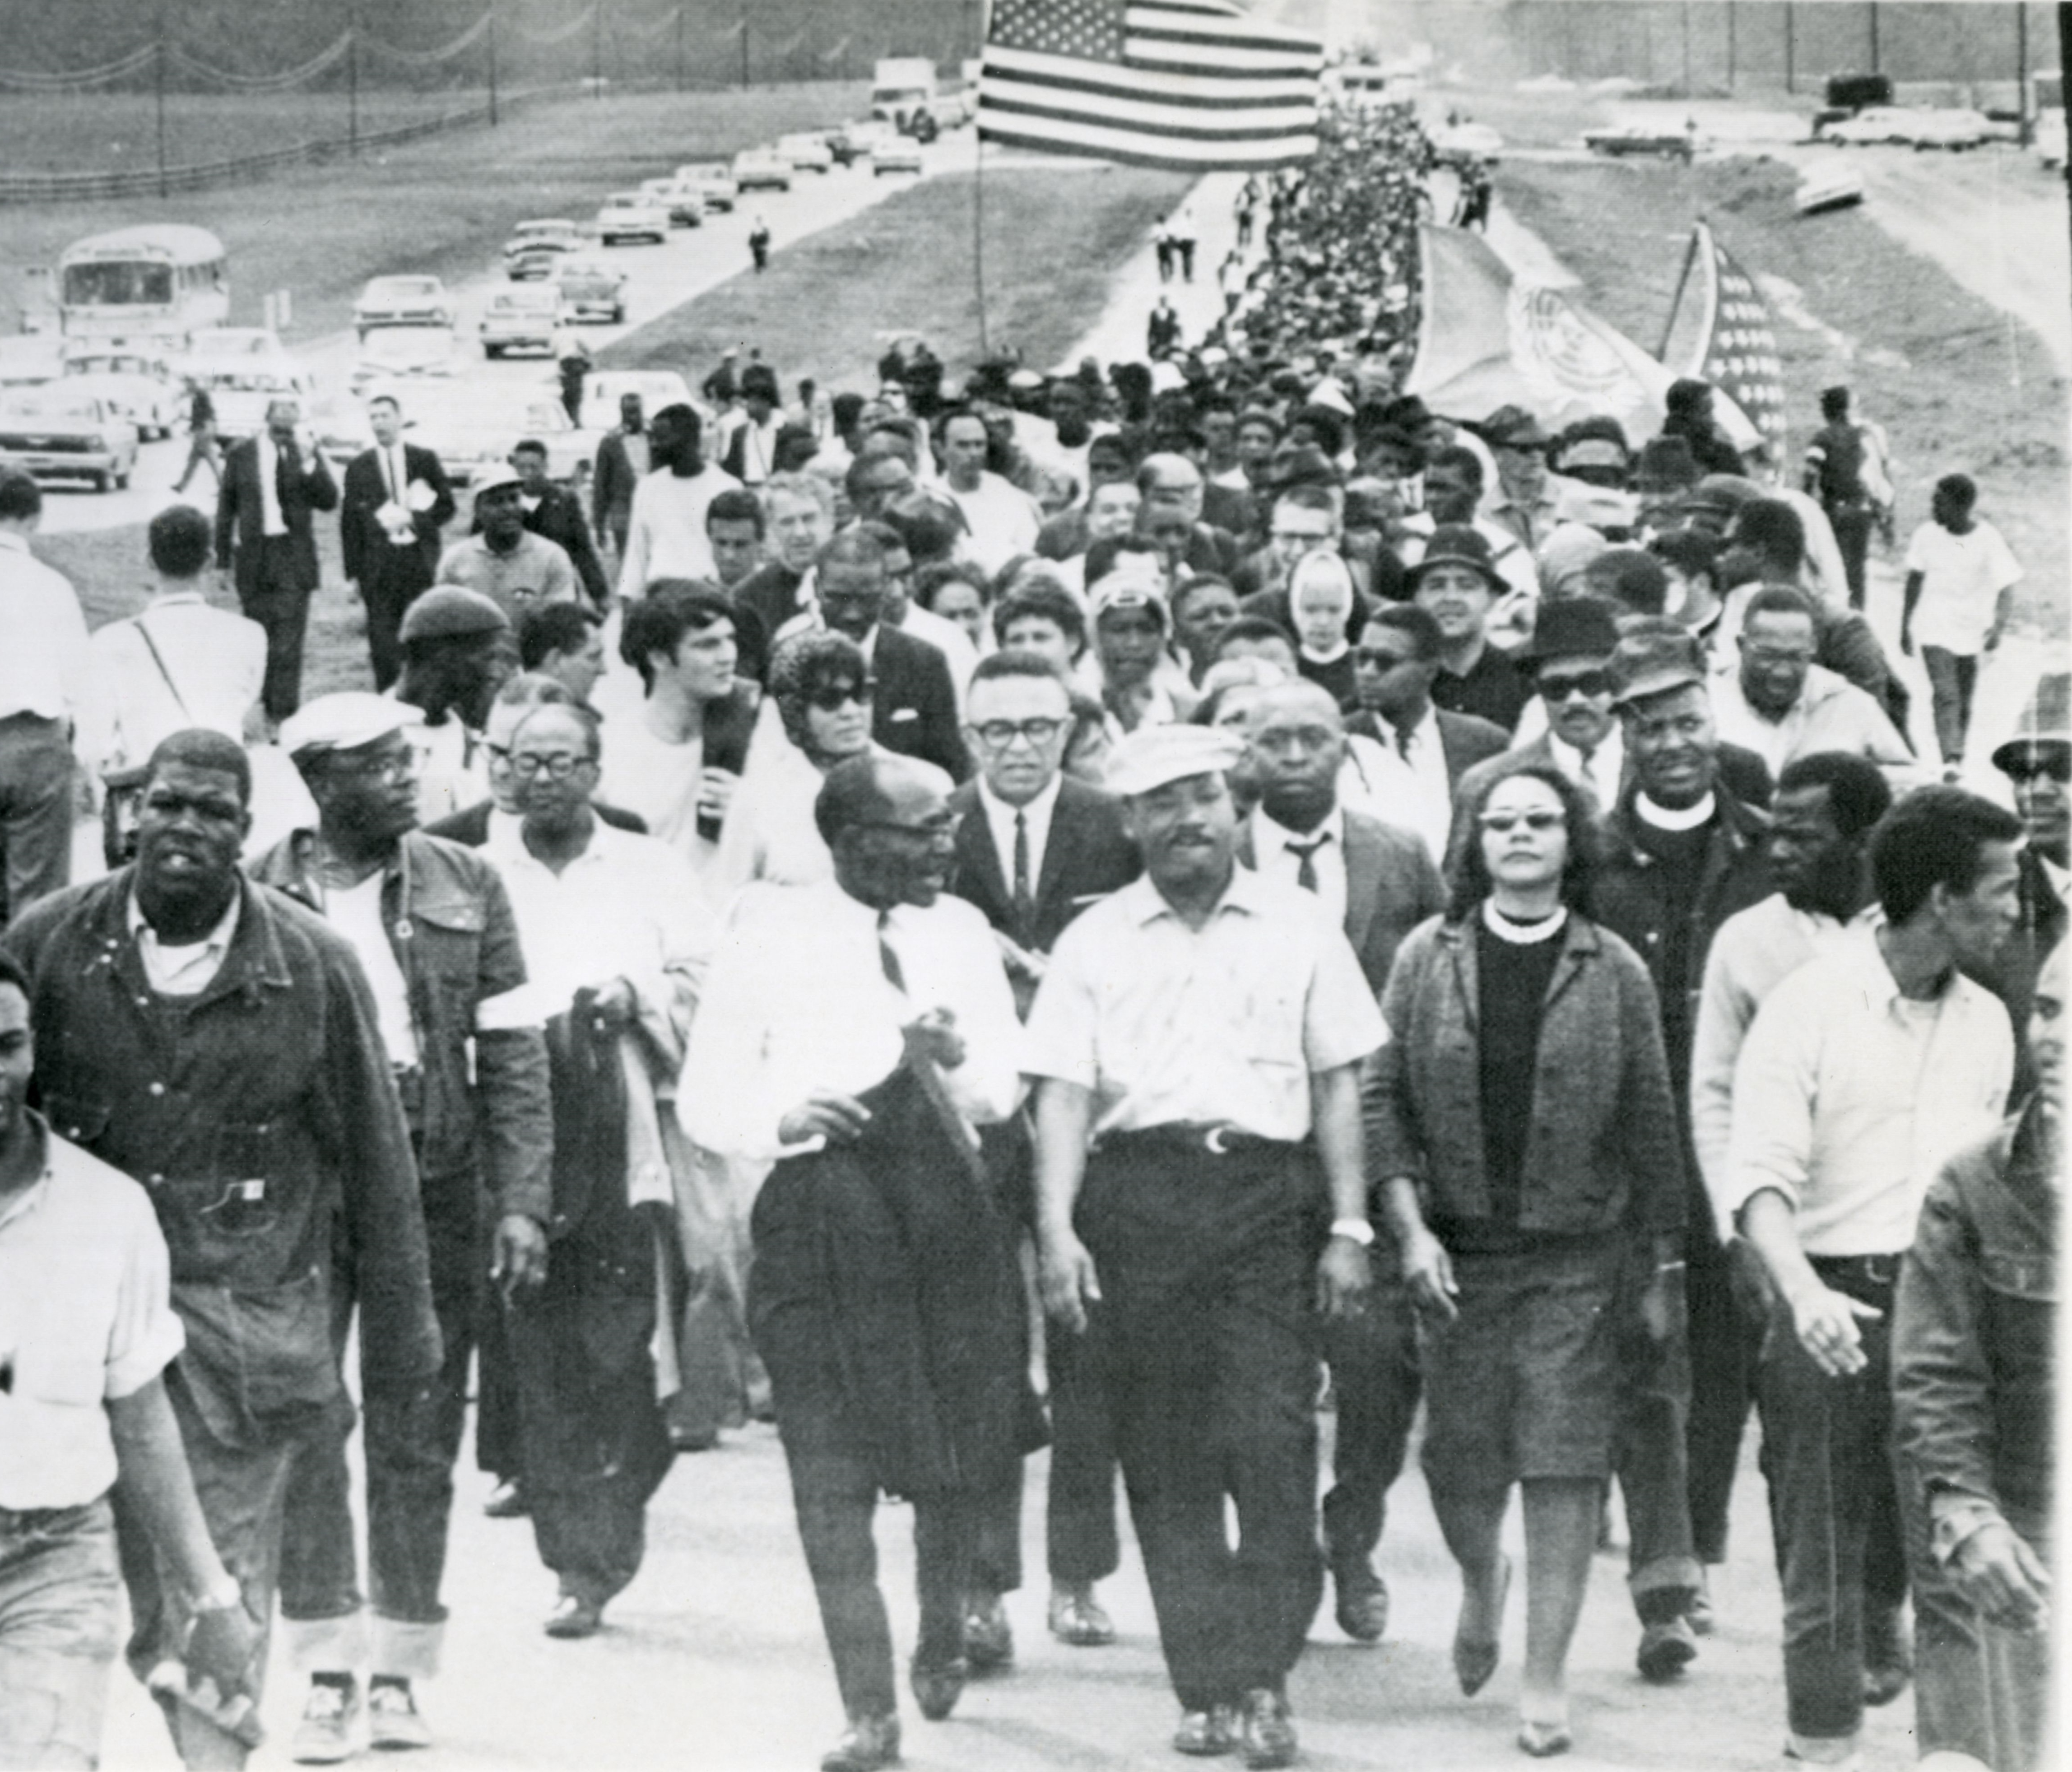 Martin Luther King Jr. leading the march from Selma to Montgomery, Alabama, March 24, 1965. (The Gilder Lehrman Institute of American History, GLC09737.05)